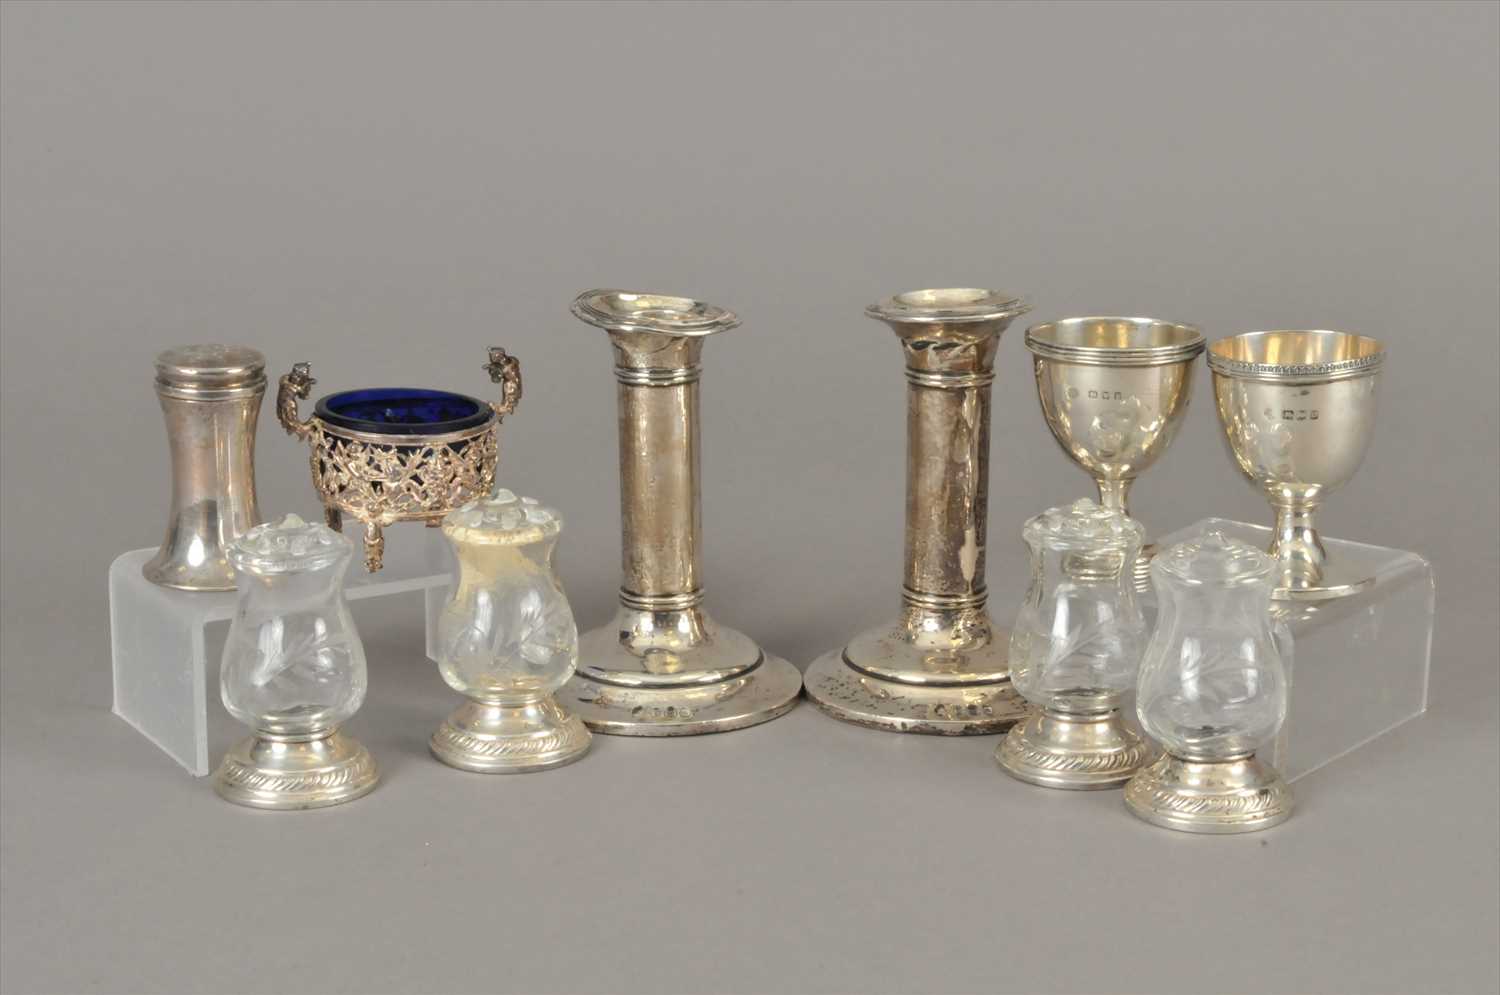 Lot 3 - A pair of short silver candlesticks, together with two silver egg cups, a salt with blue glass liner, a pepperette and white metal mounted glass salt/pepper pots